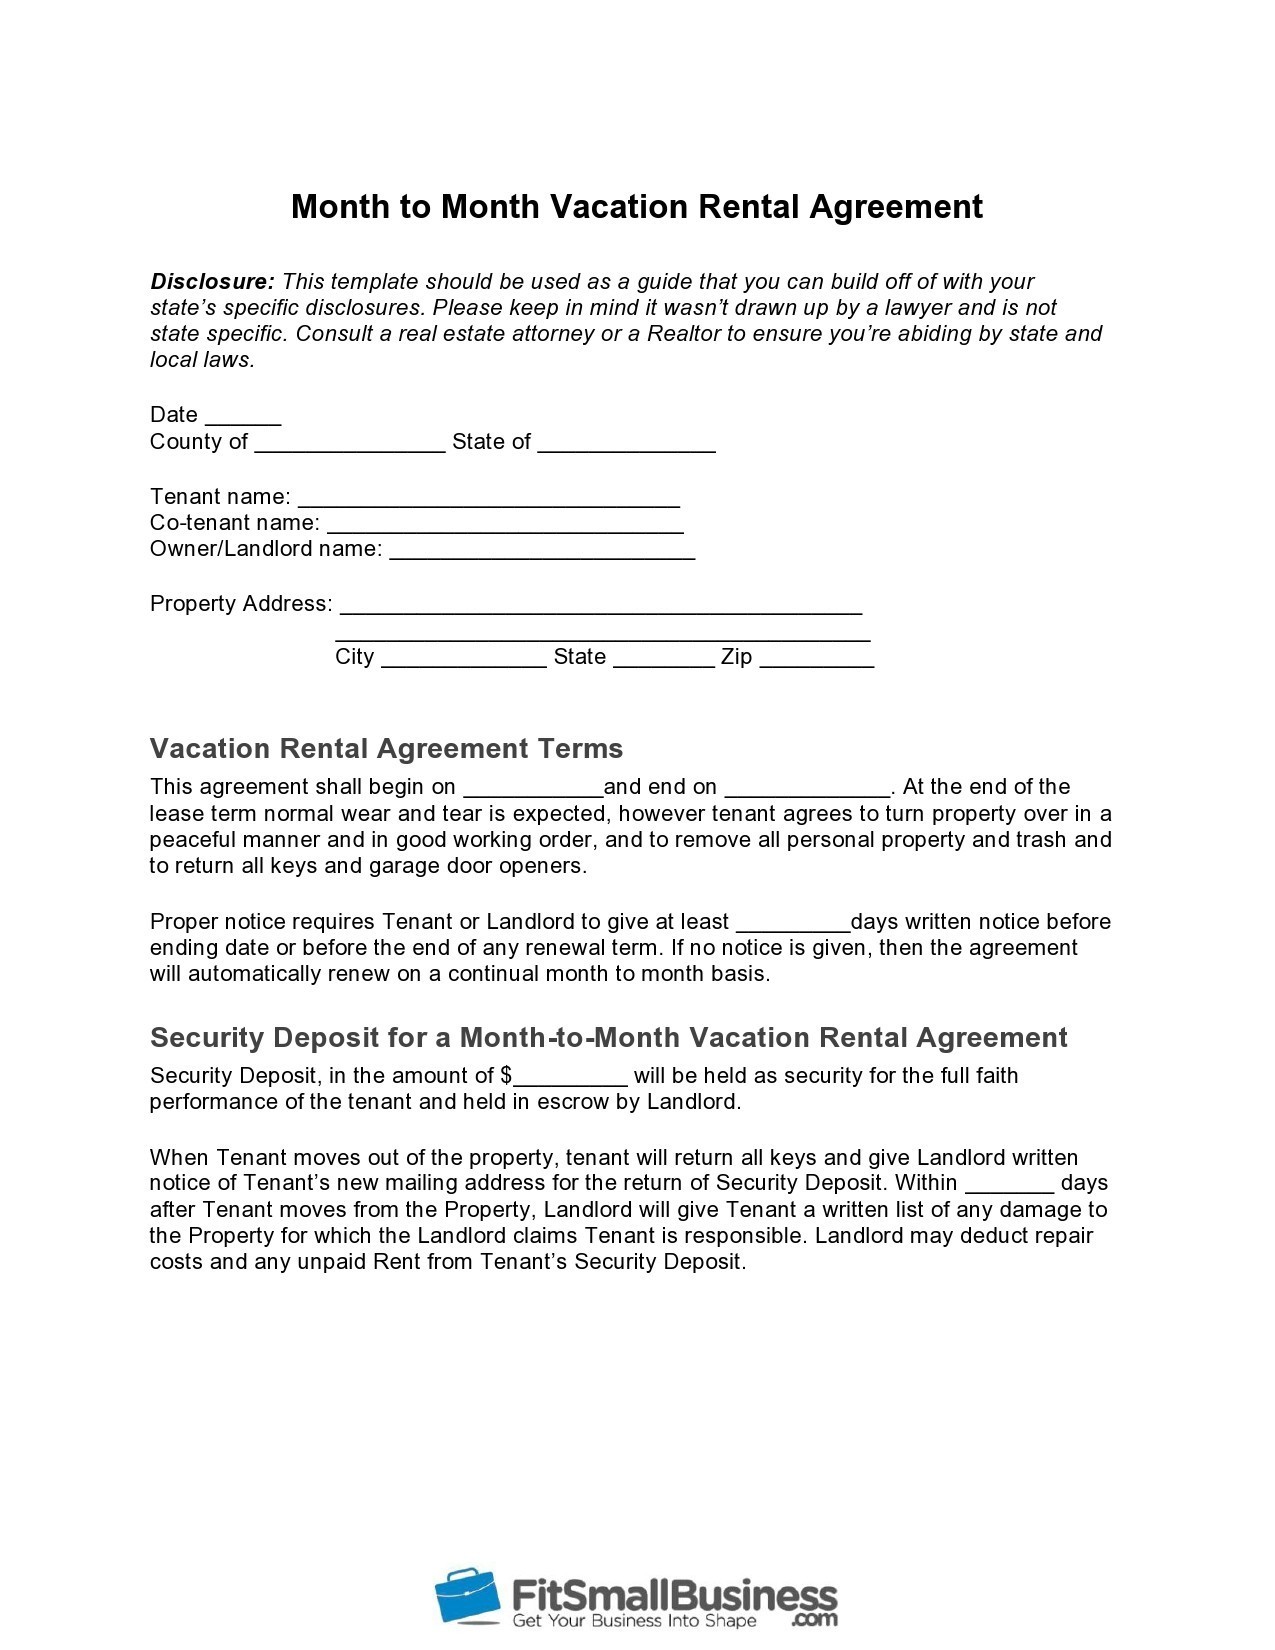 Free vacation rental agreement 15